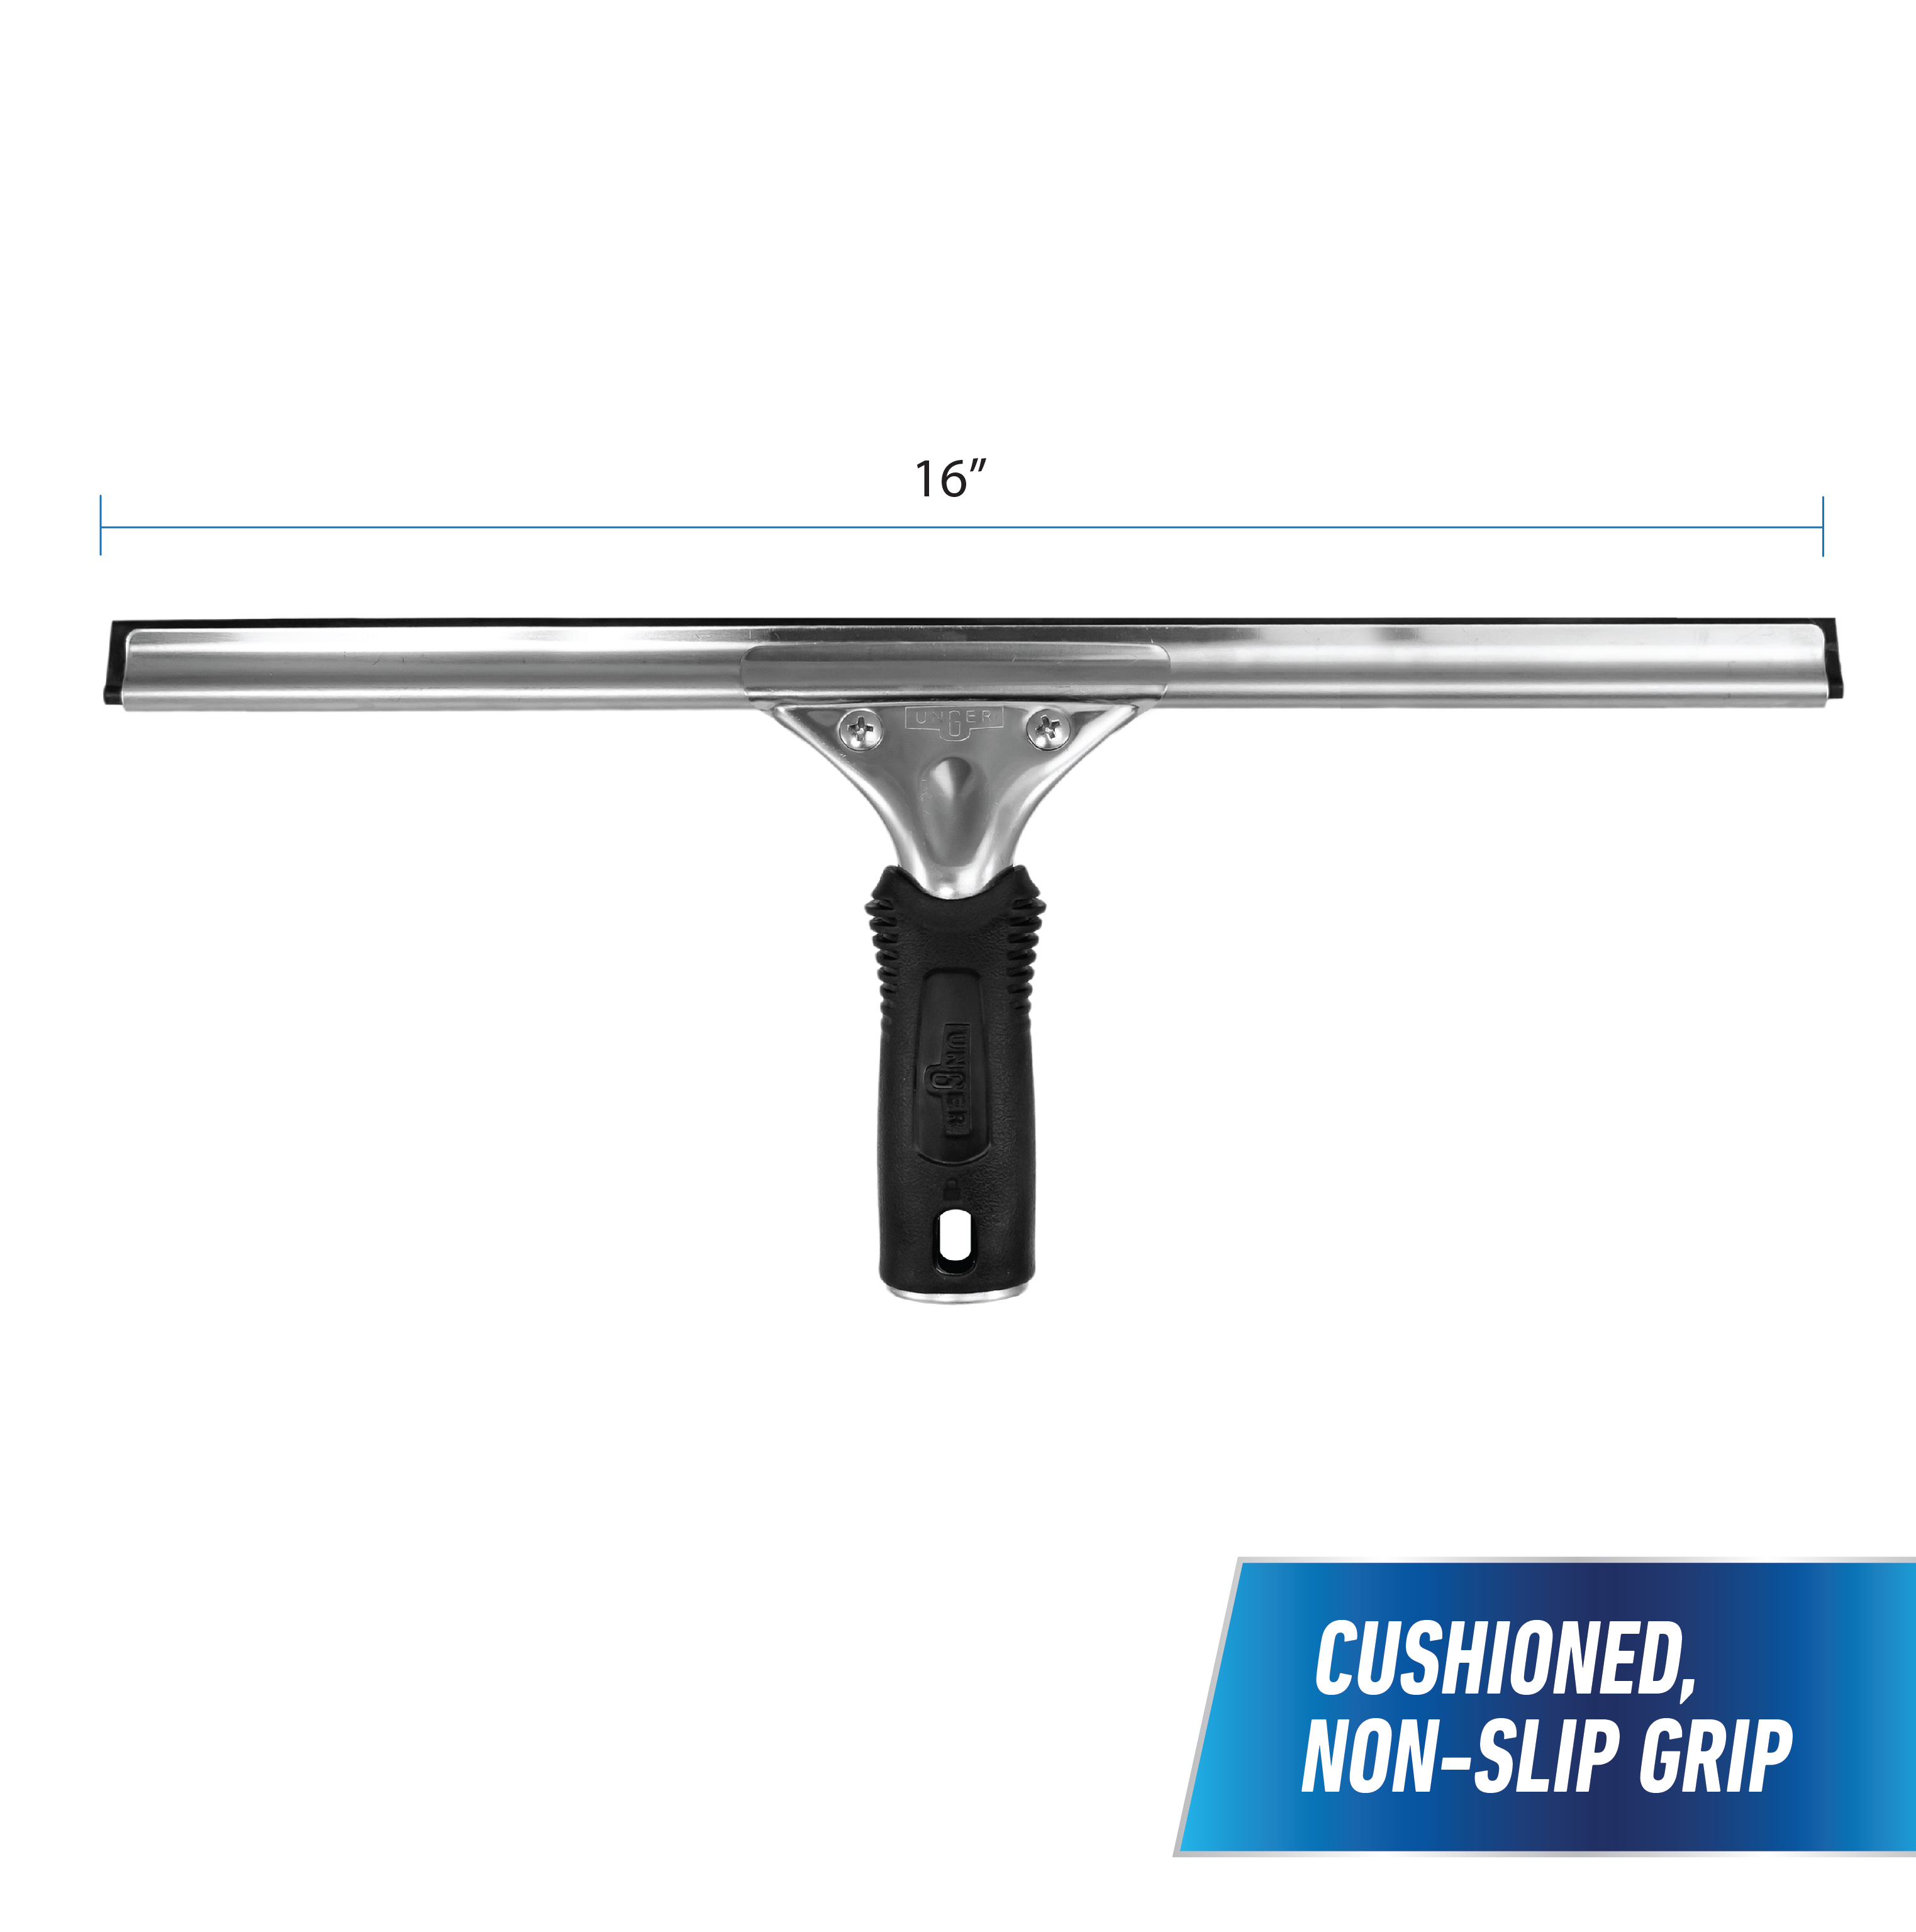 981020_UI_Unger Pro_16 inch Performance Grip Squeegee_Product Feature 1